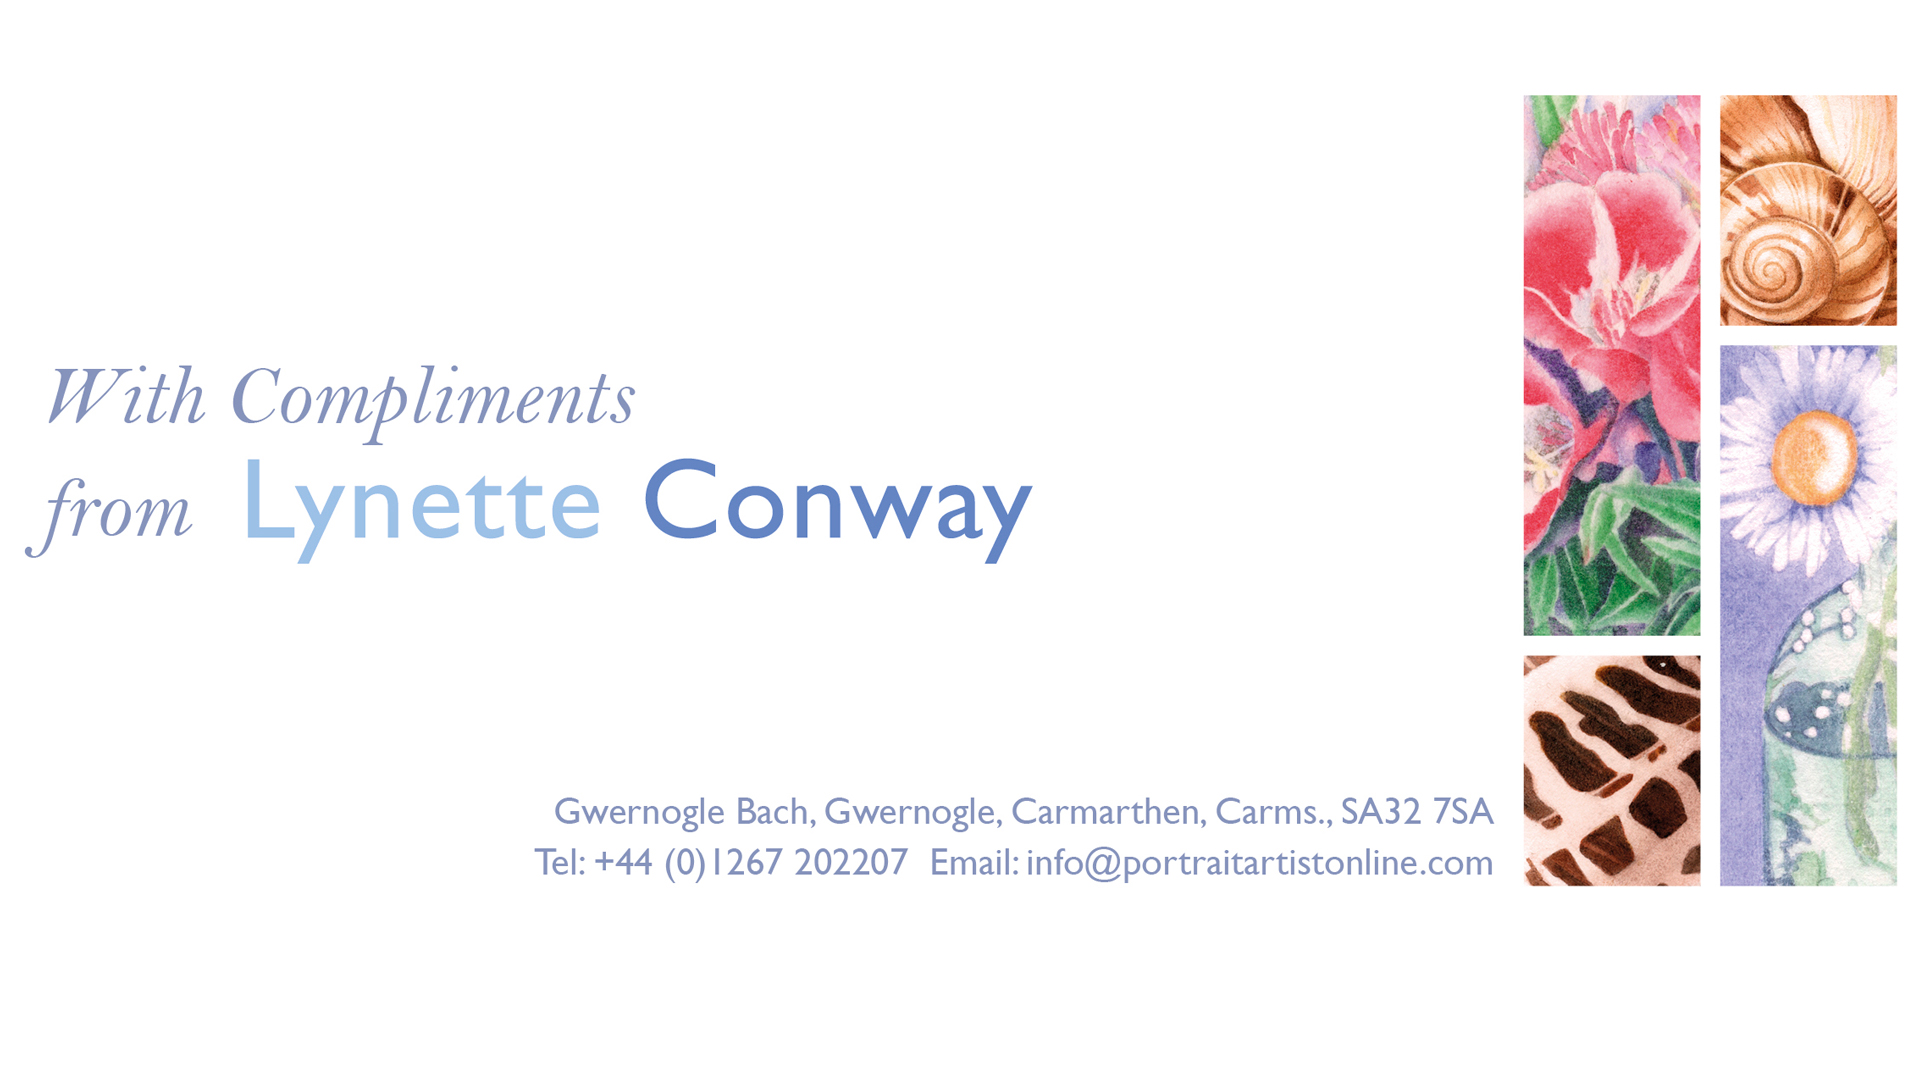 Letterheads and compliment slips